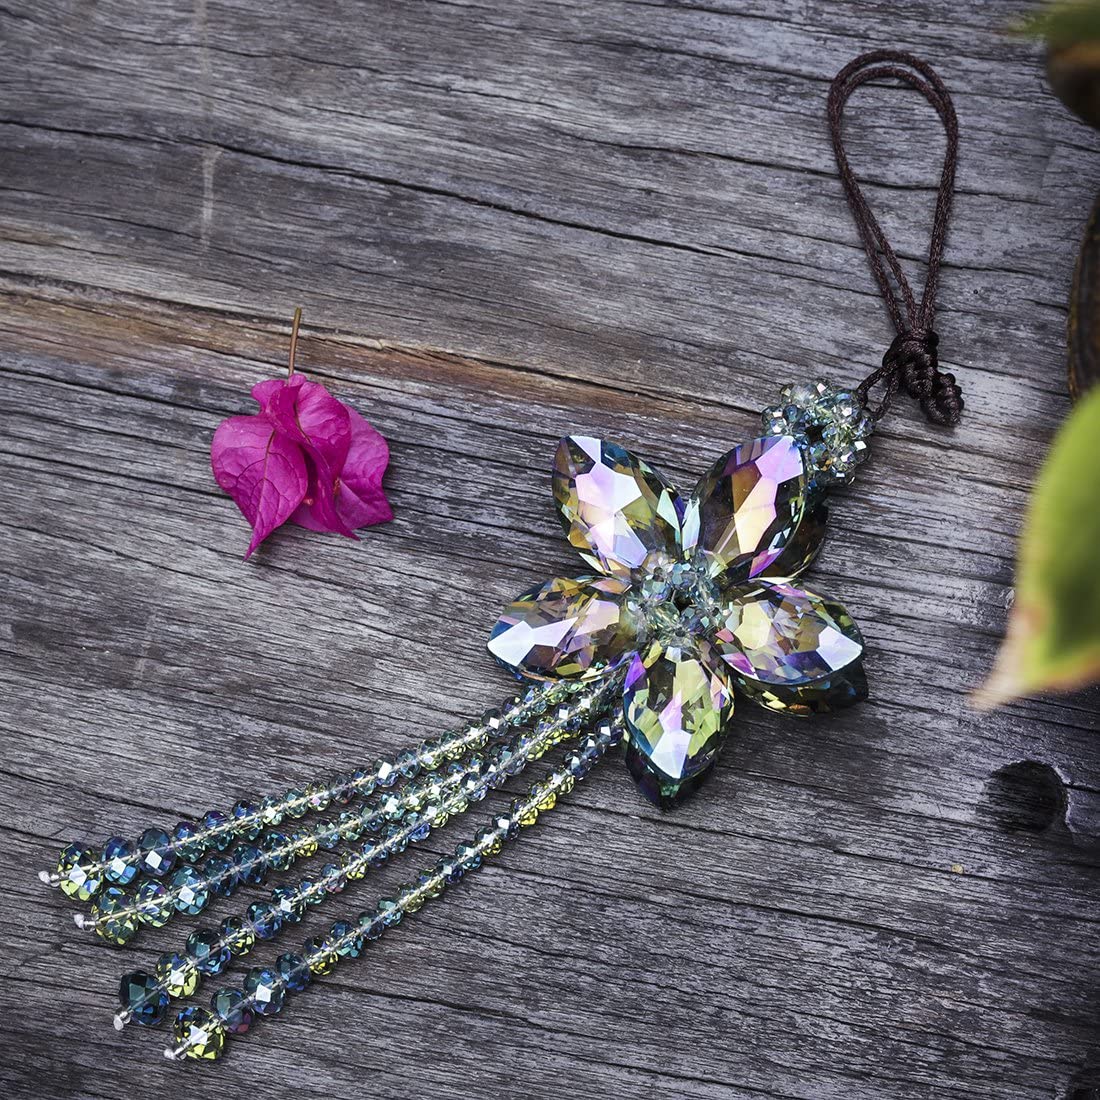 Crystal Color Flower Interior Accessories Car Charms Pendants for Auto Rear View Mirror Hanging Decoration with Tassel